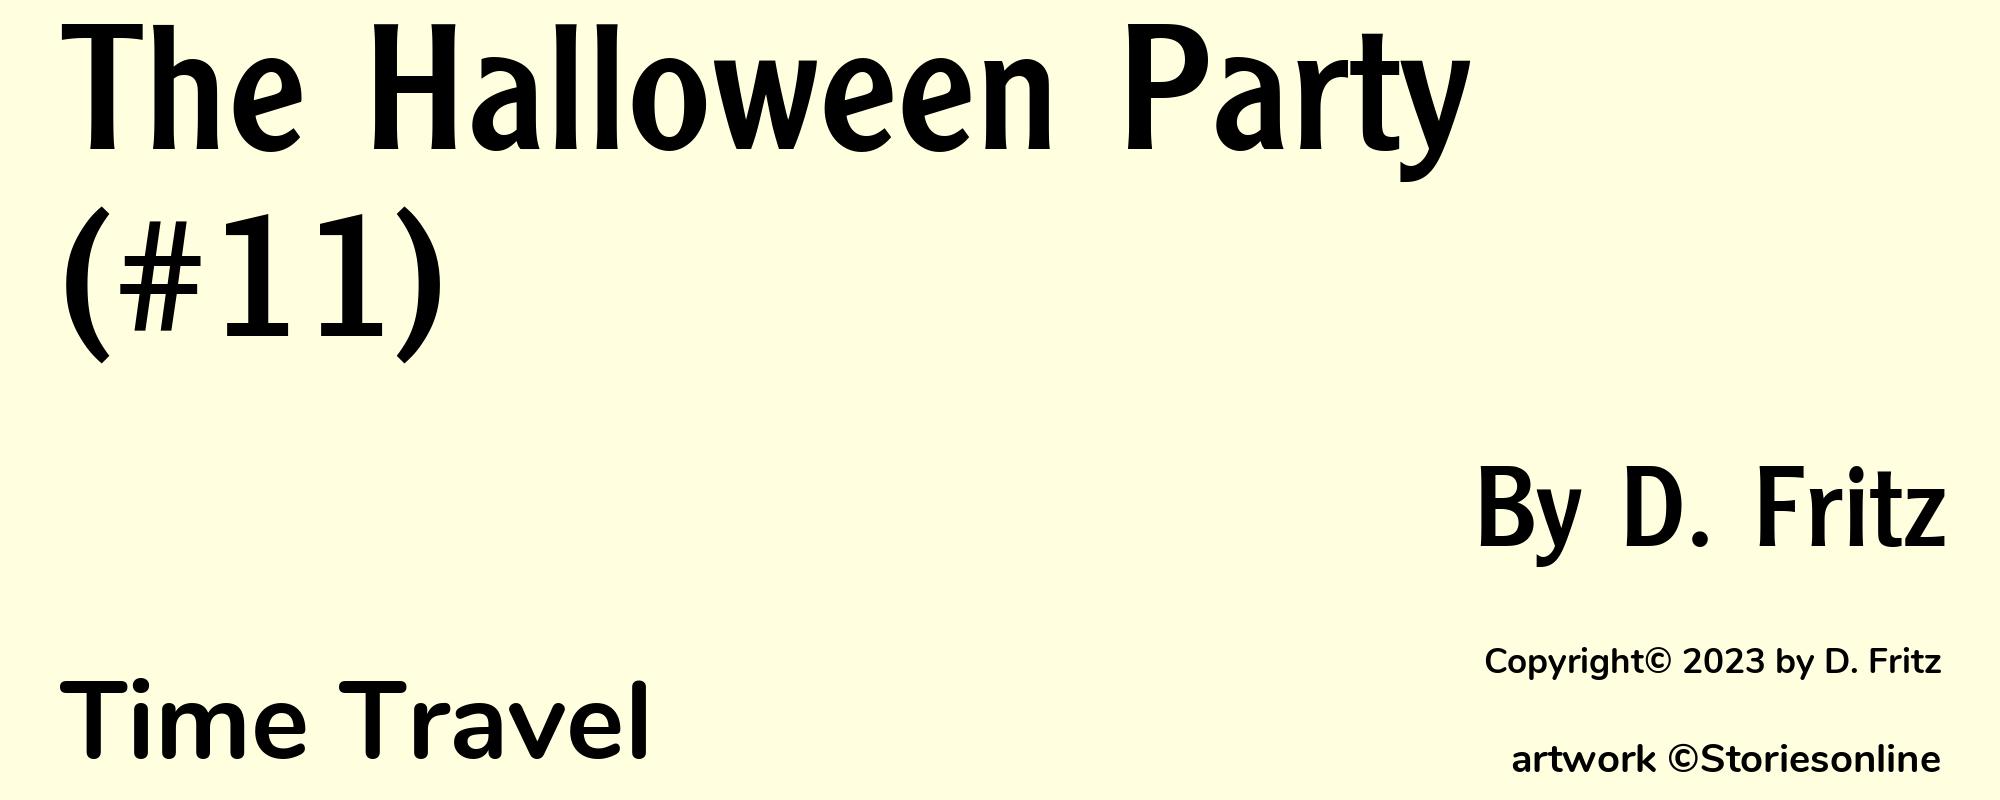 The Halloween Party (#11) - Cover